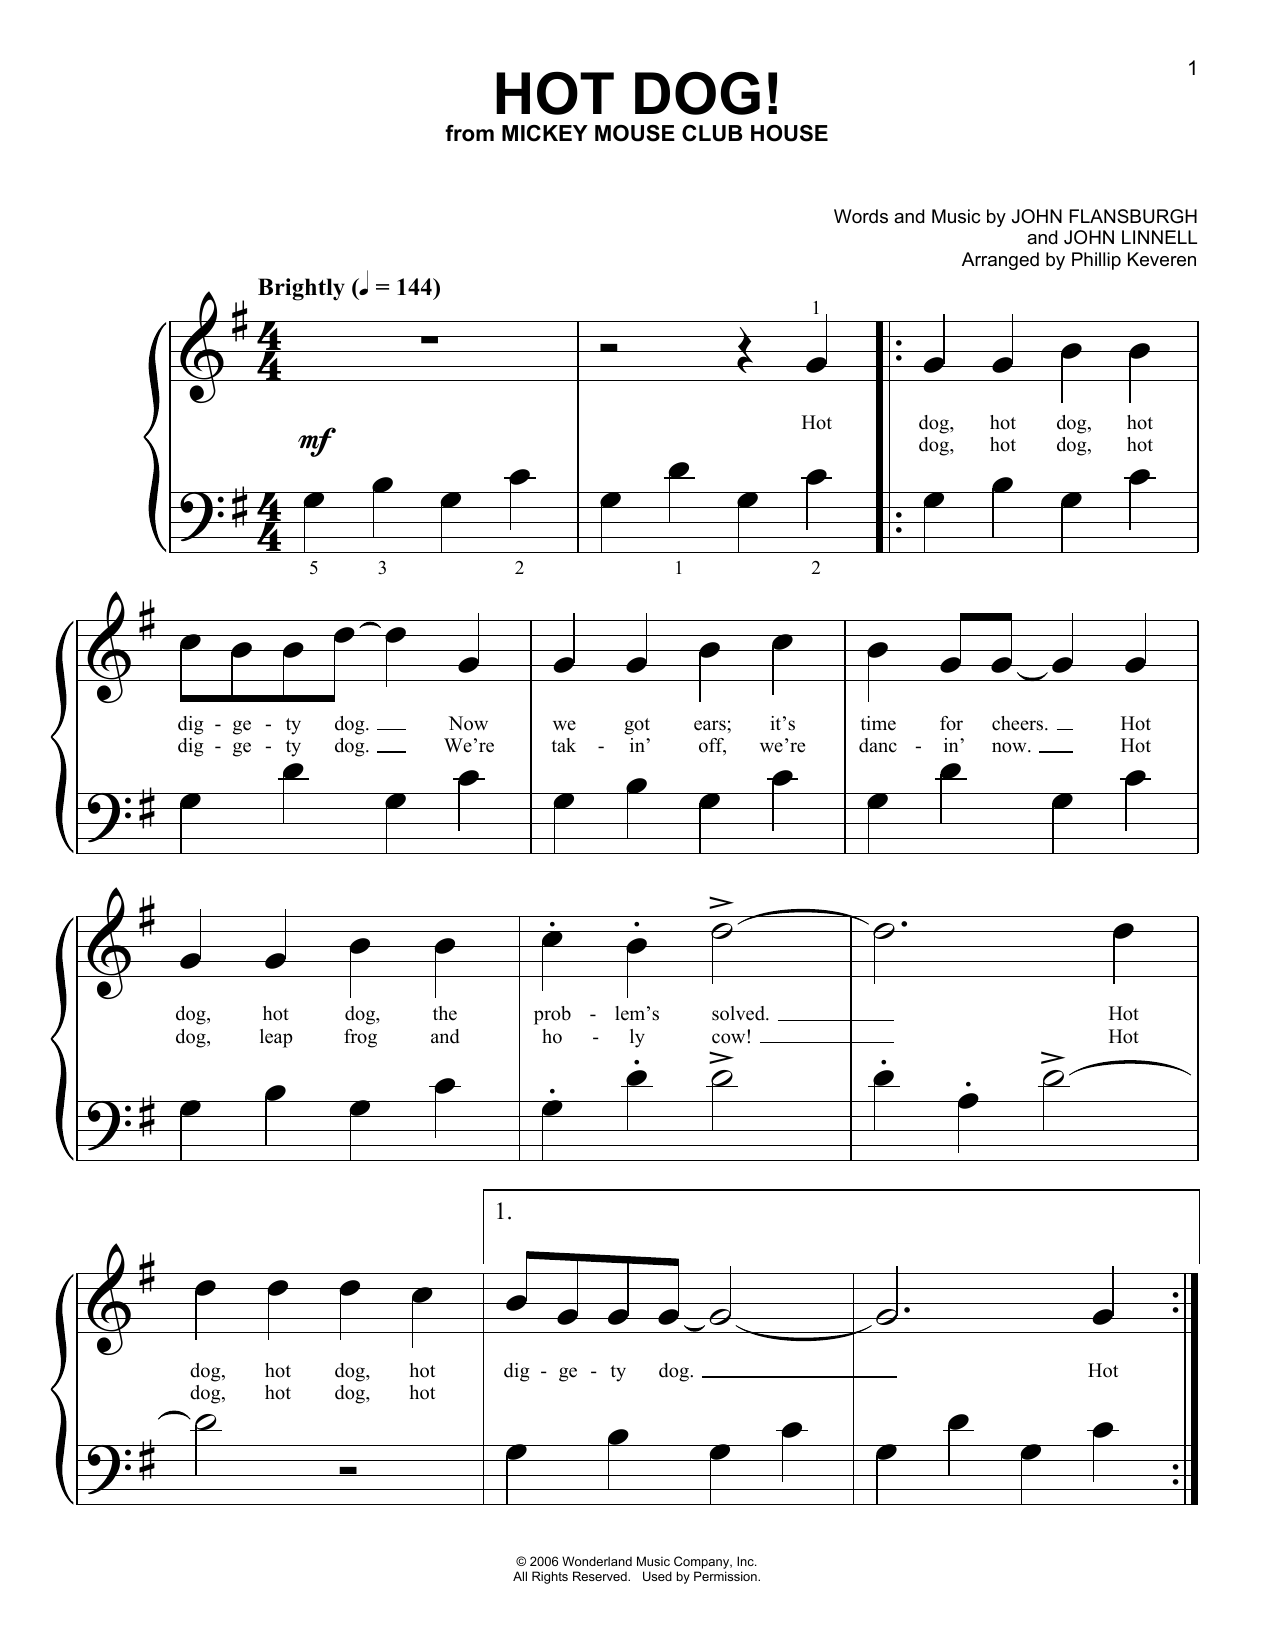 They Might Be Giants Mickey Mouse Clubhouse Theme Sheet Music in D Major  (transposable) - Download & Print - SKU: MN0074247